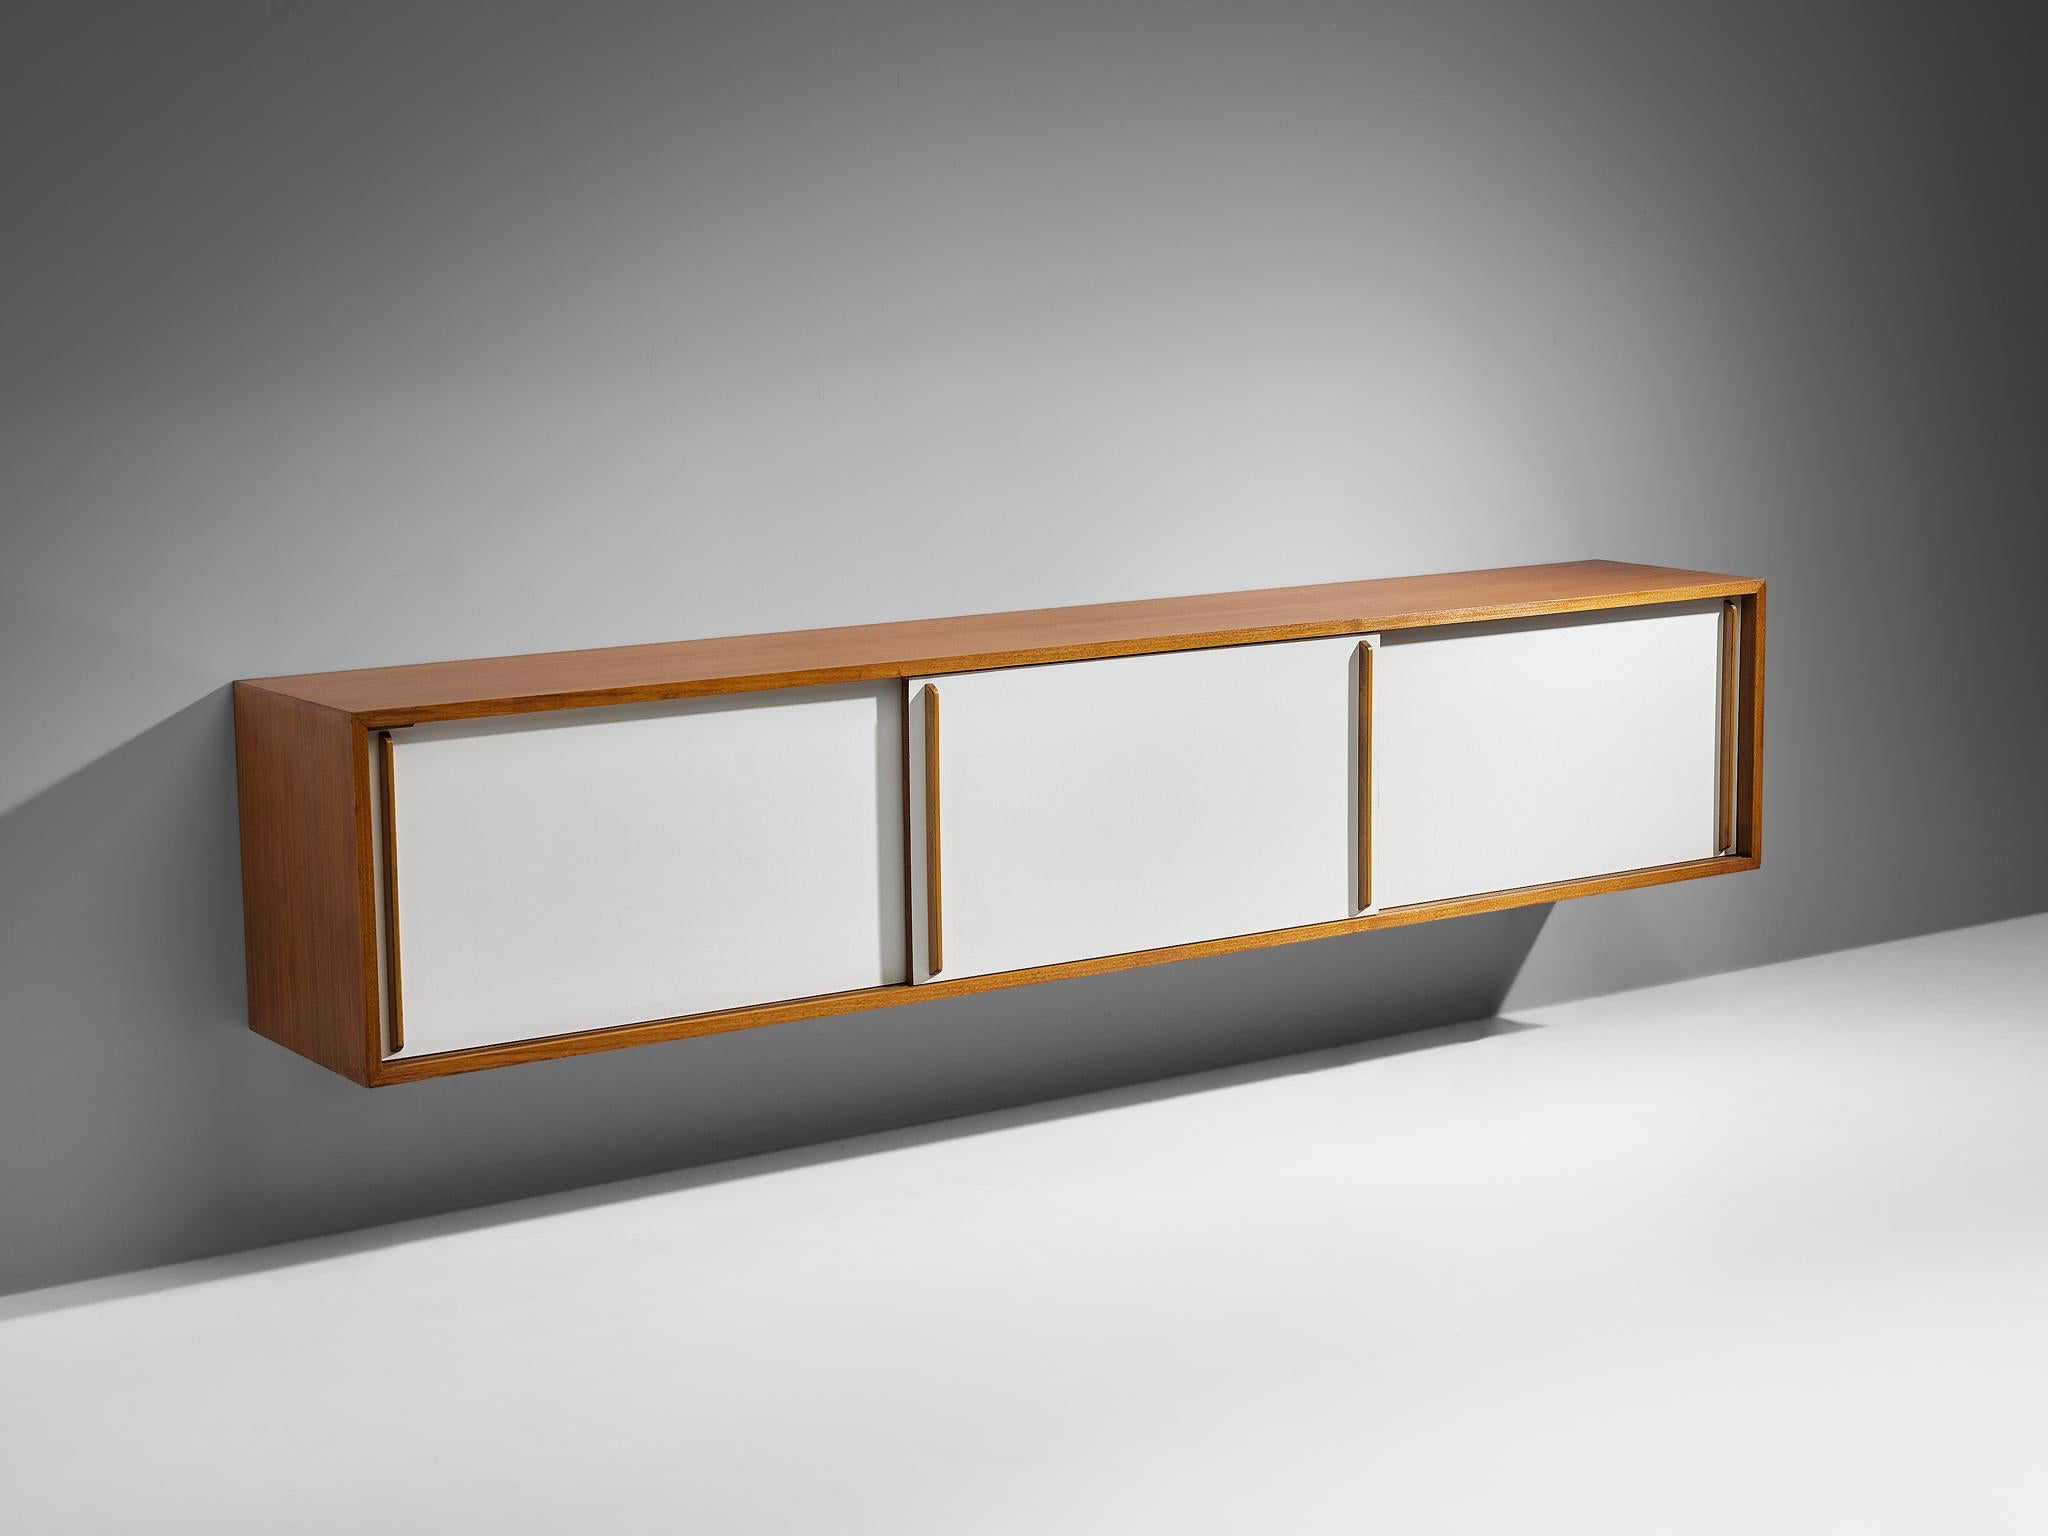 Sideboard, teak, lacquered wood, Europe, 1960s. 

Elegant mounted sideboard made in teak and lacquered wood. This sideboard appears very sleek and sober but notice the nice detailing of the teak handles that stand out against the light colored